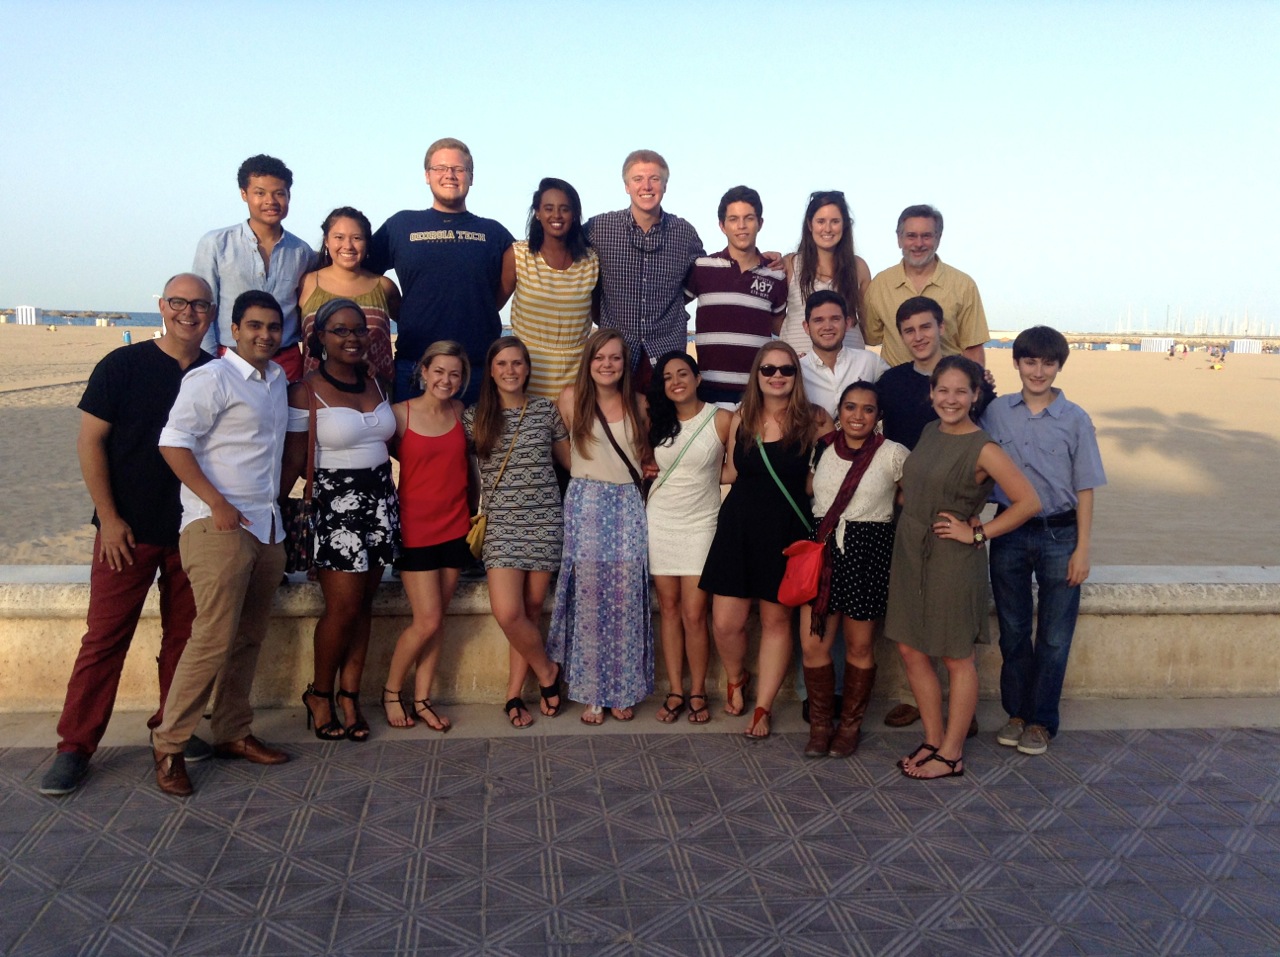 Kirk Bowman (left) and the student participants in the 2014 Spain/Portugal study abroad program.